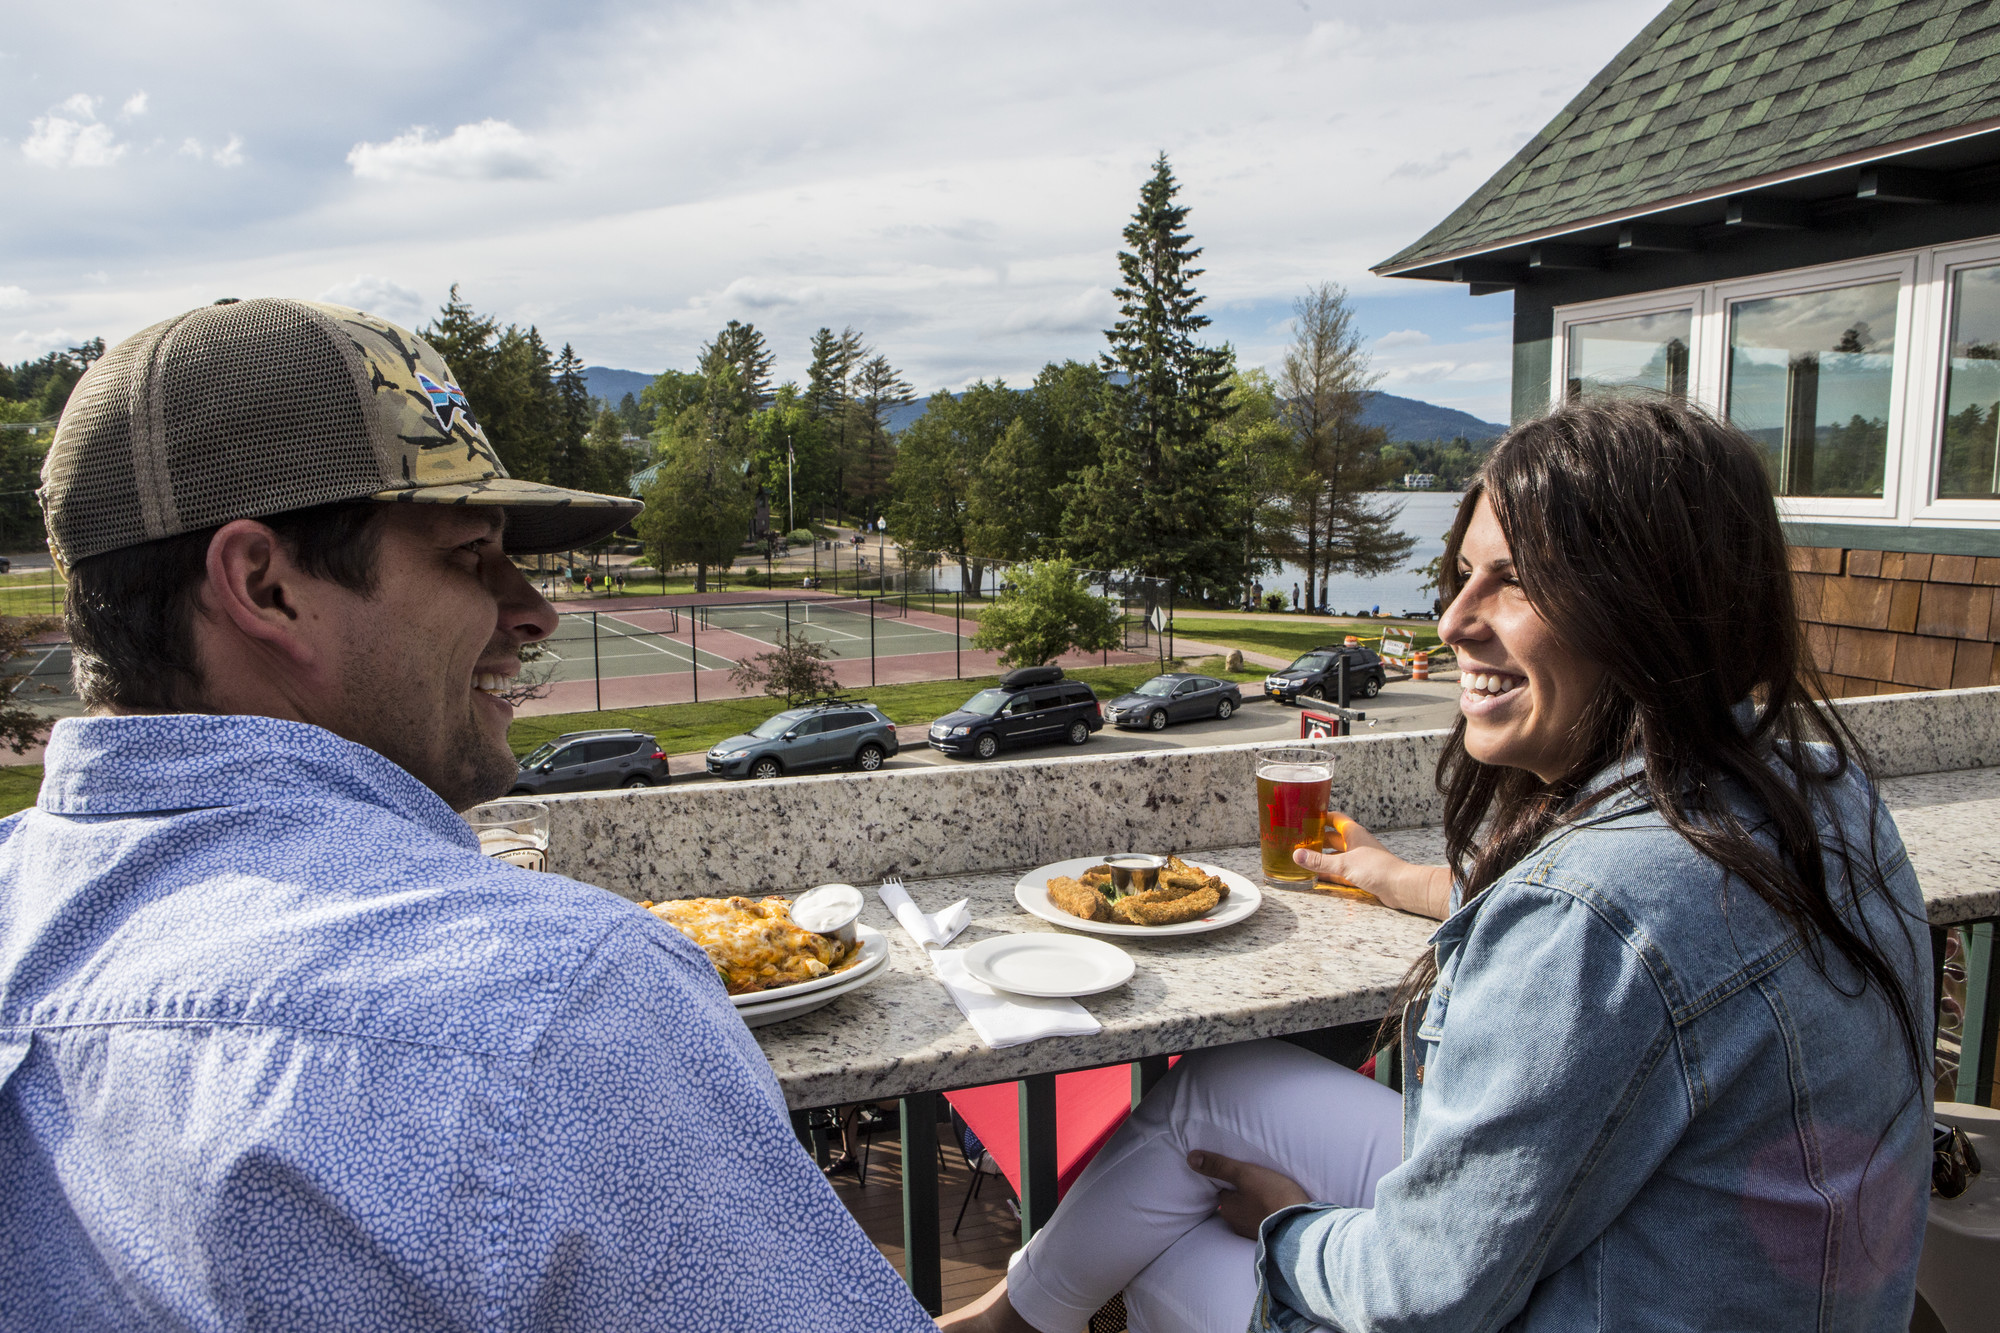 A couple smiles as they enjoy a meal on an outdoor deck.